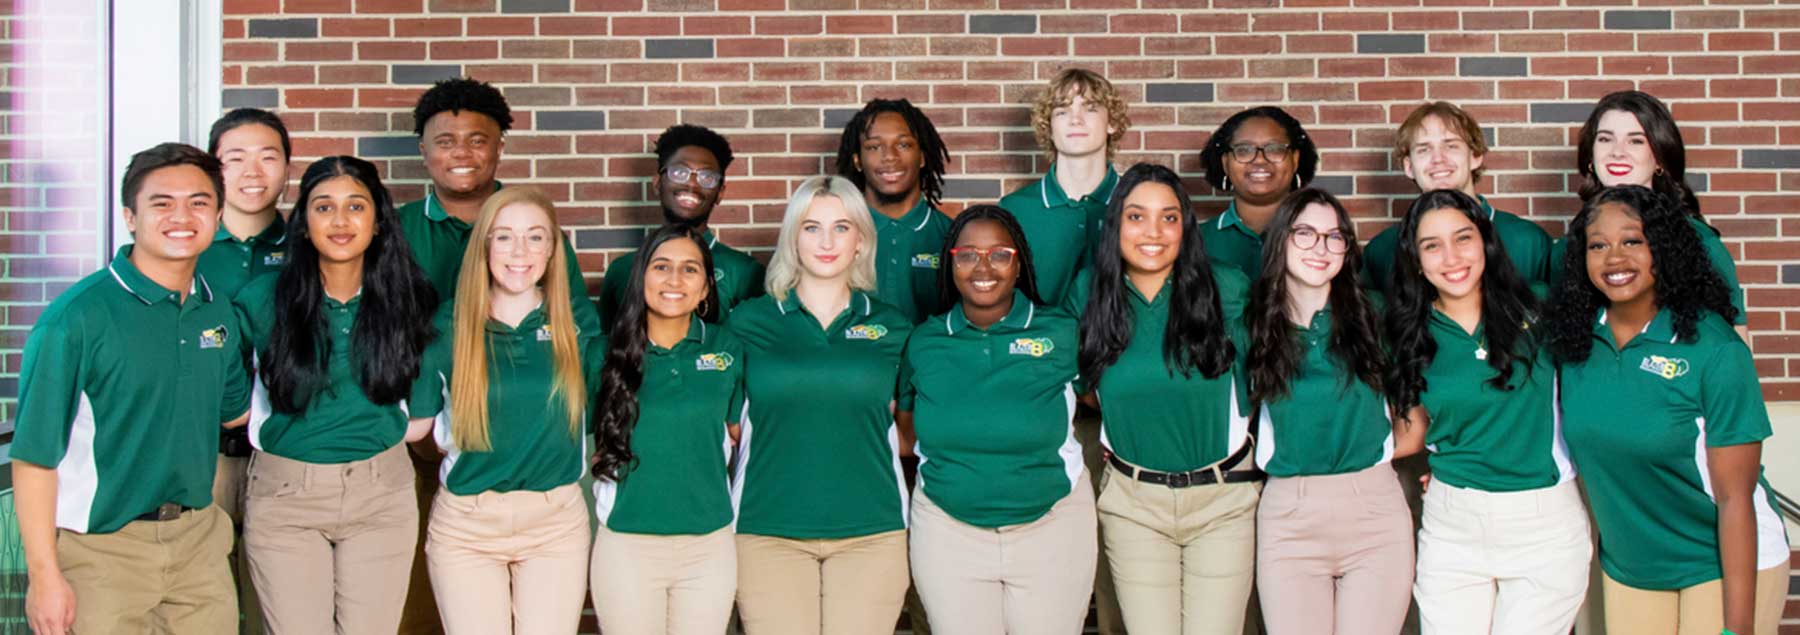 A group image of Orientation leaders